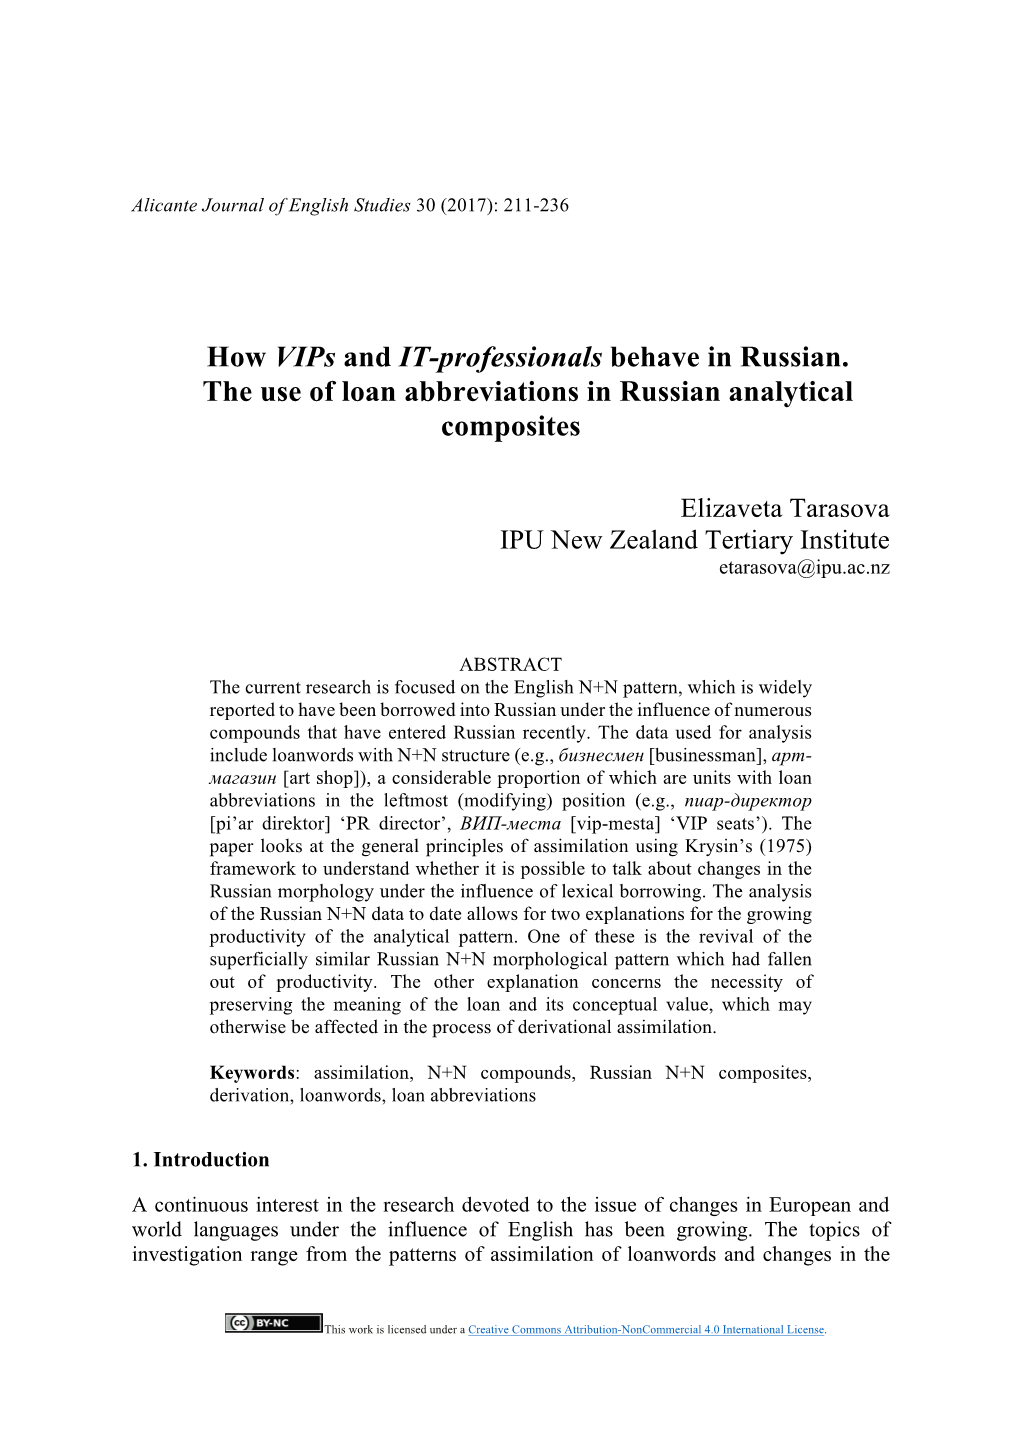 How Vips and IT-Professionals Behave in Russian. the Use of Loan Abbreviations in Russian Analytical Composites